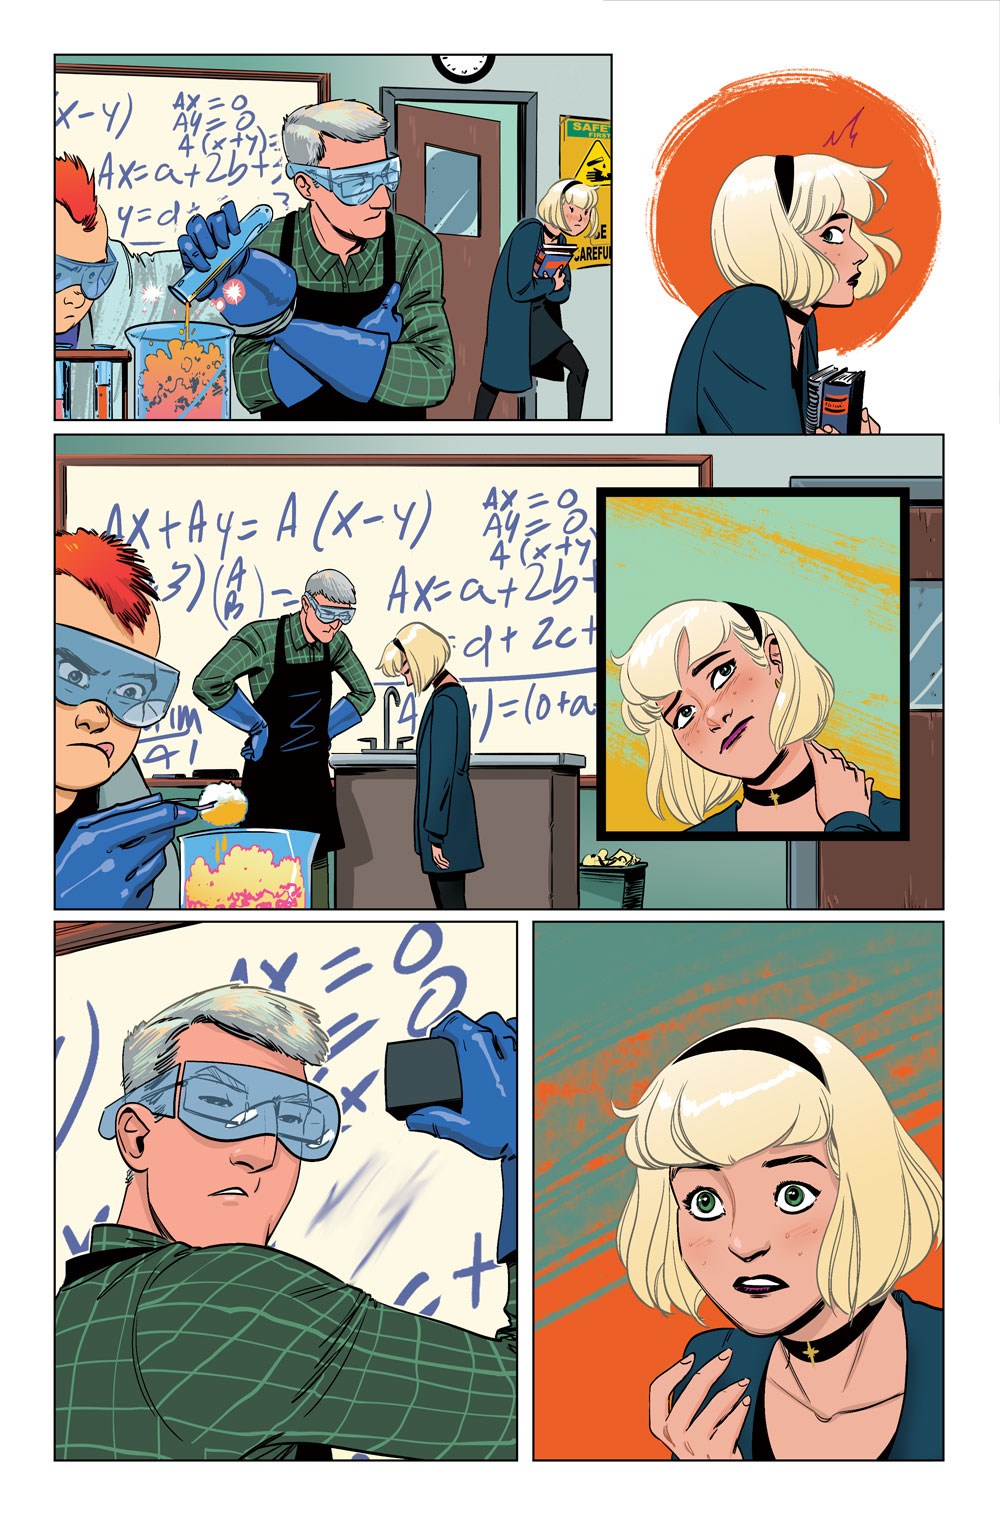 Sabrina the Teenage Witch #4 preview page 4